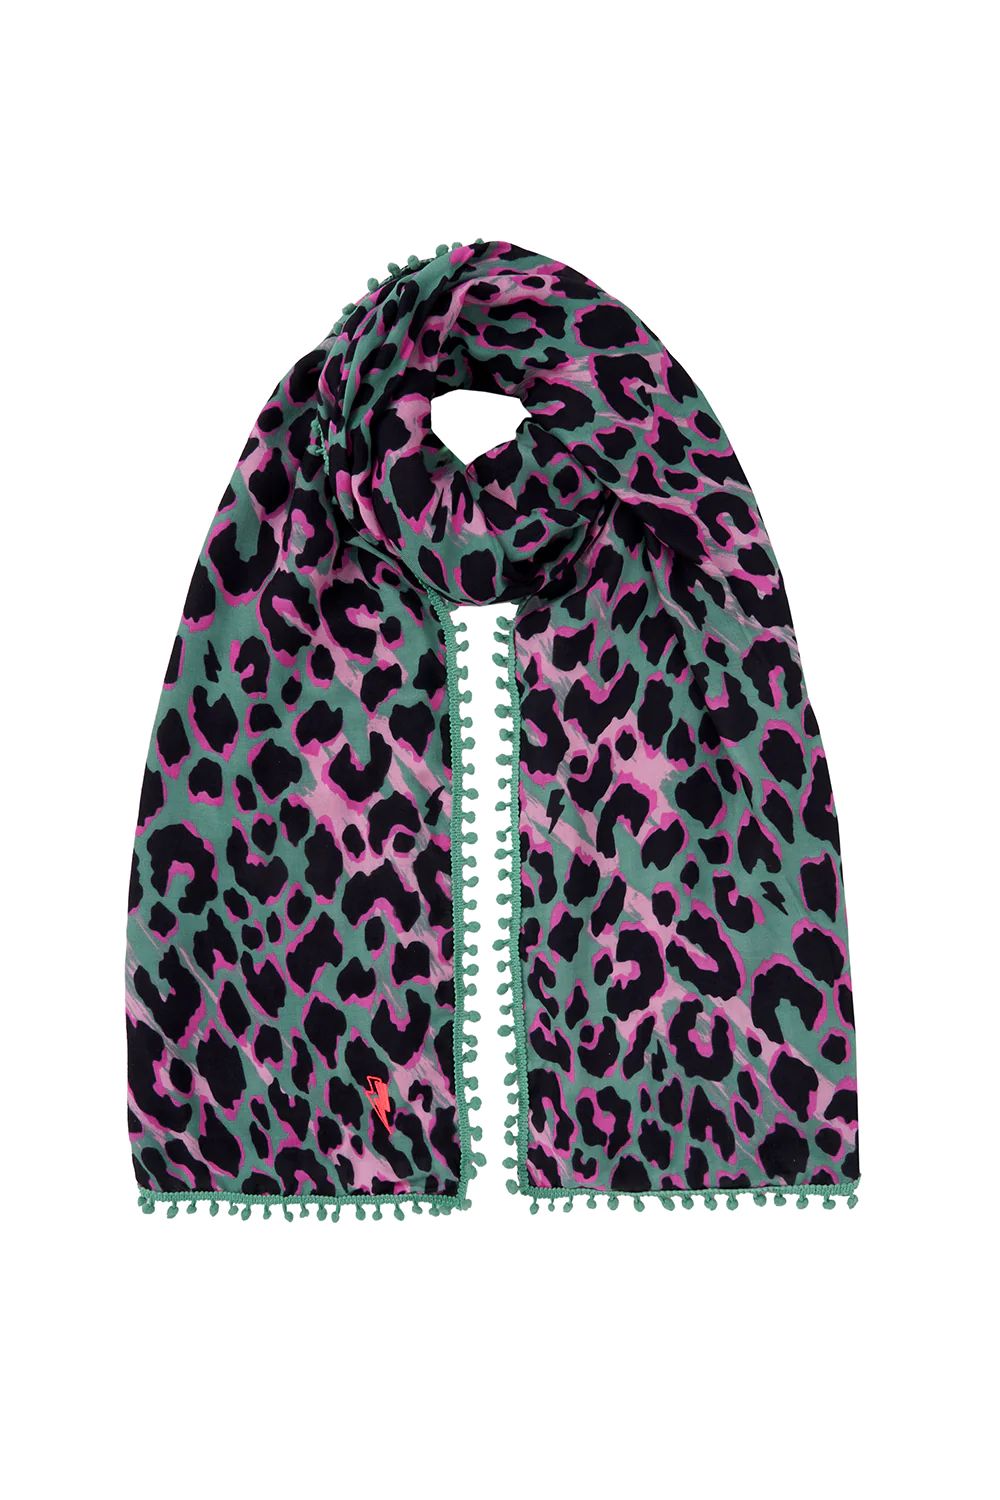 Khaki with Pink and Black Shadow Leopard Charity Super Scarf | Scamp & Dude